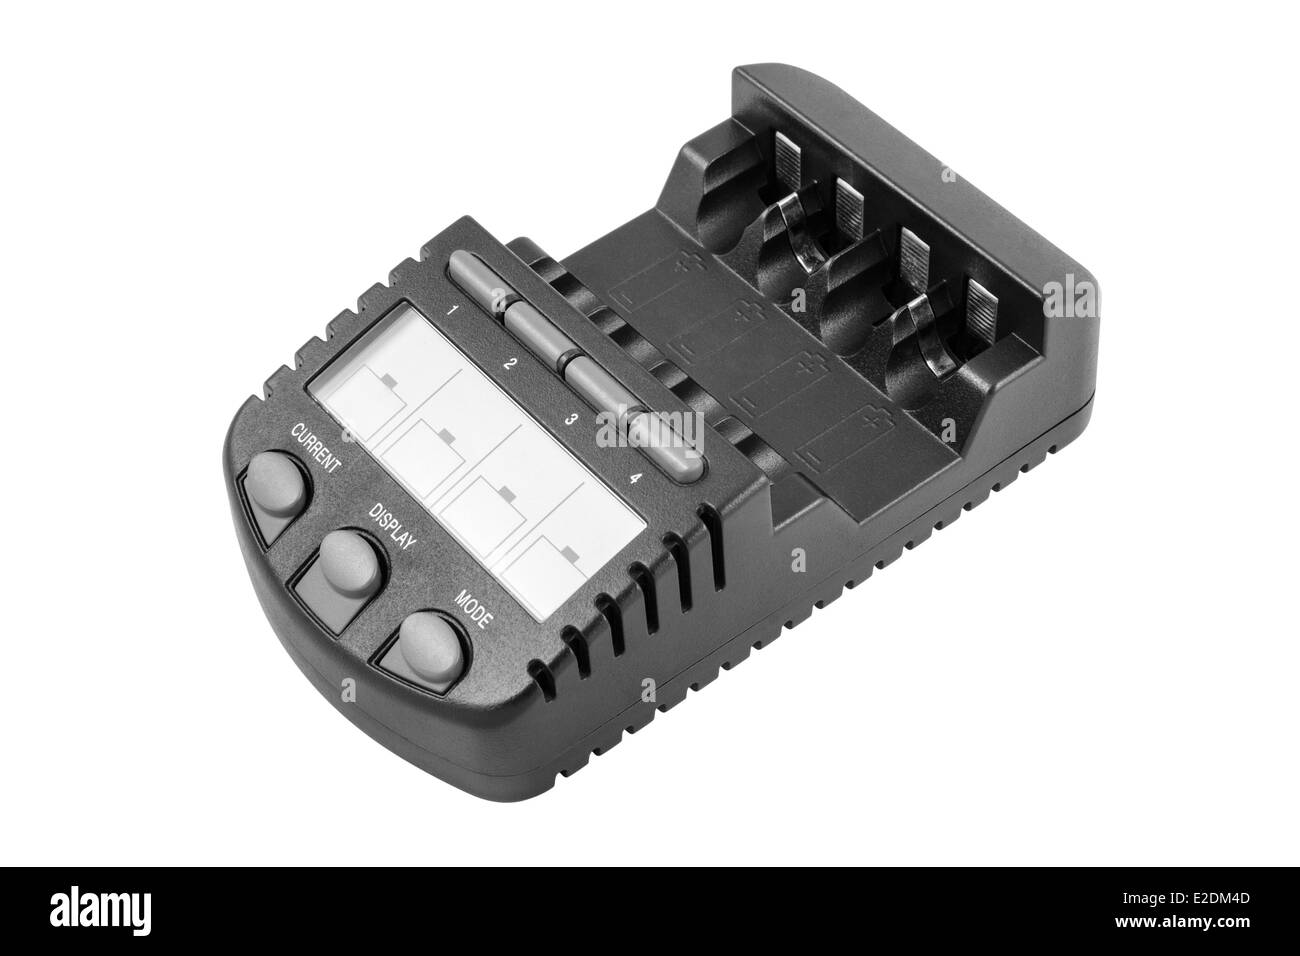 Intelligent Ni-MH battery charger. Isolated on white backgroungd with clipping path. Stock Photo